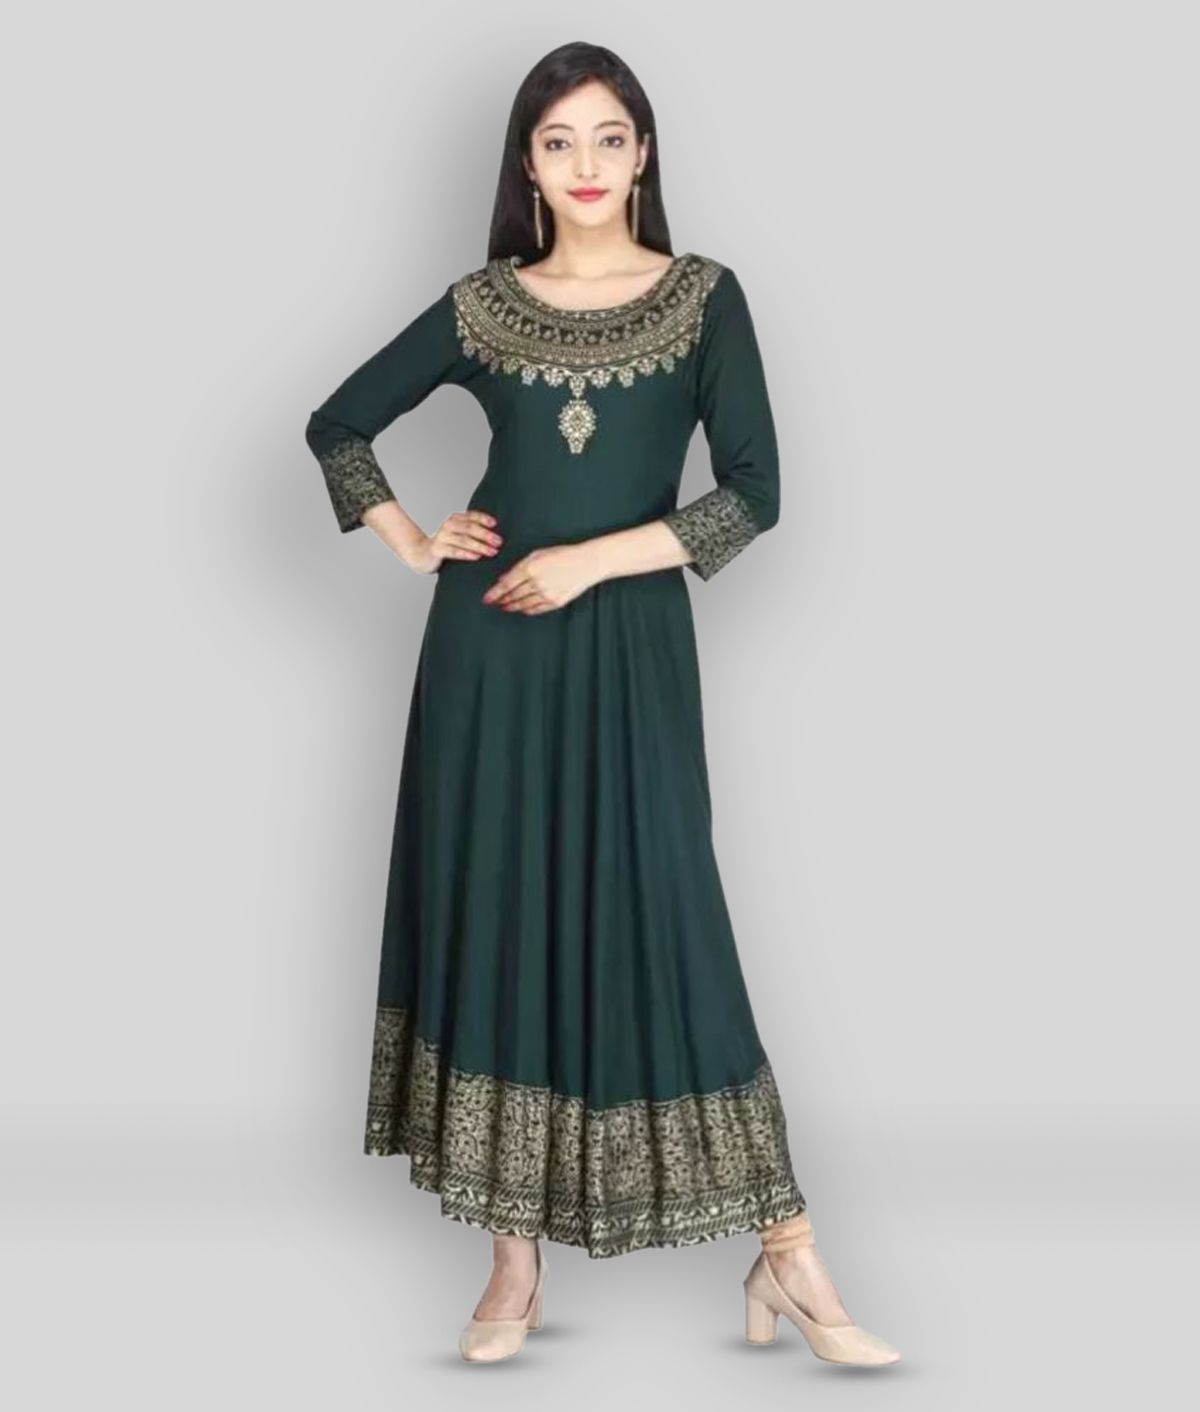 VESTIMENTO - Green Anarkali Cotton Women's Stitched Ethnic Gown ( Pack of 1 )